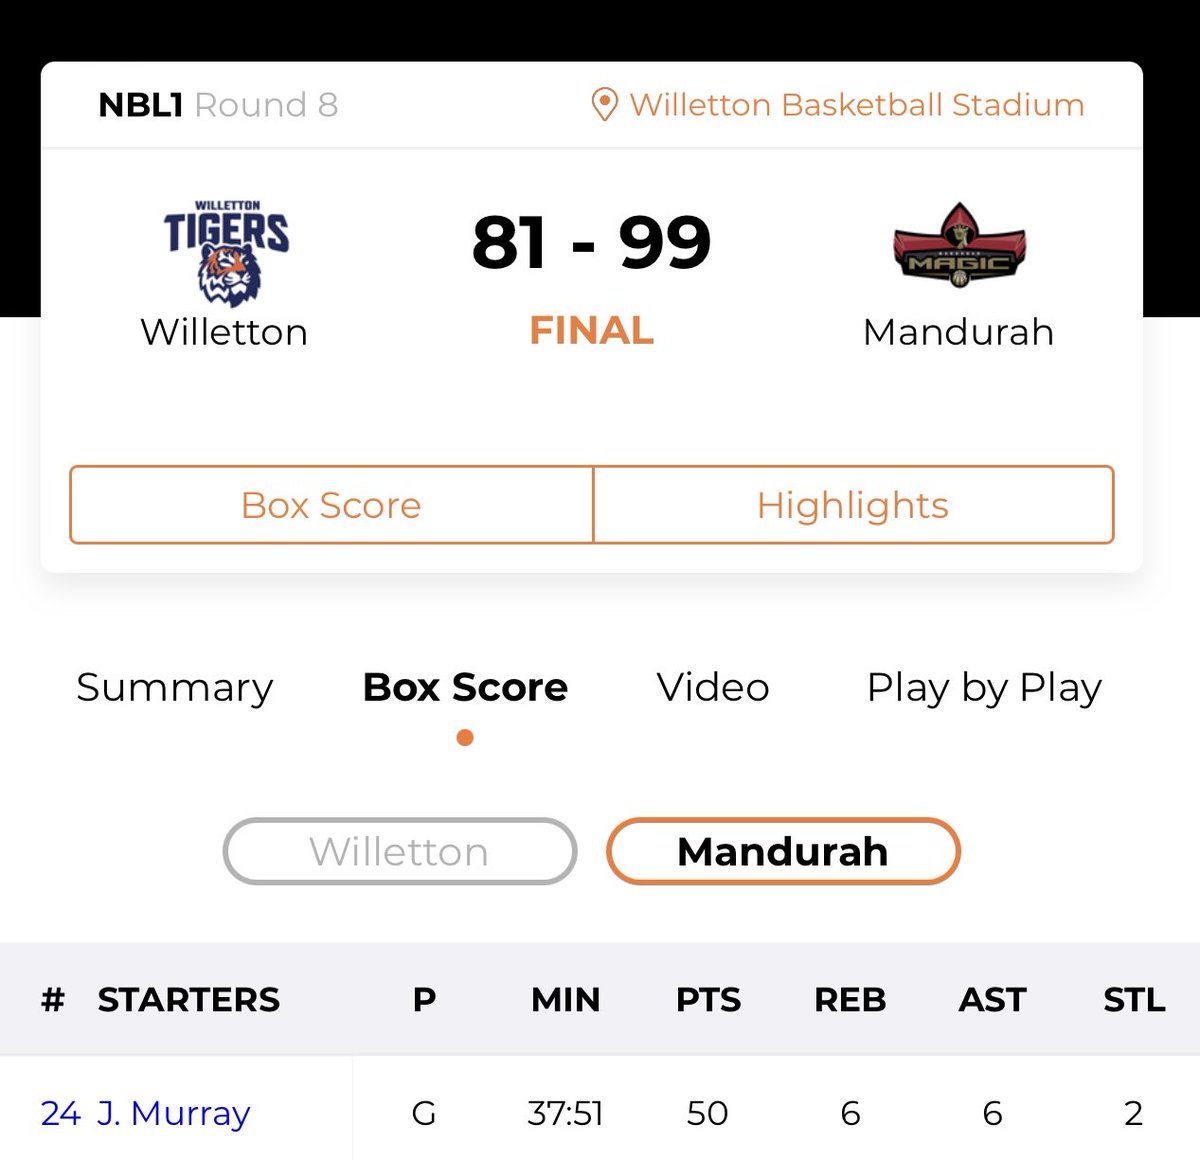 50 pts 6 asts and 6 reb In 37 min This is legendary work for a rookie across them waters. @showtimejo__ @NBL1 enjoy the show while y’all still have him there 😂 @NBL there’s smoke for any PG y’all have at the next level. He’ll see y’all soon.